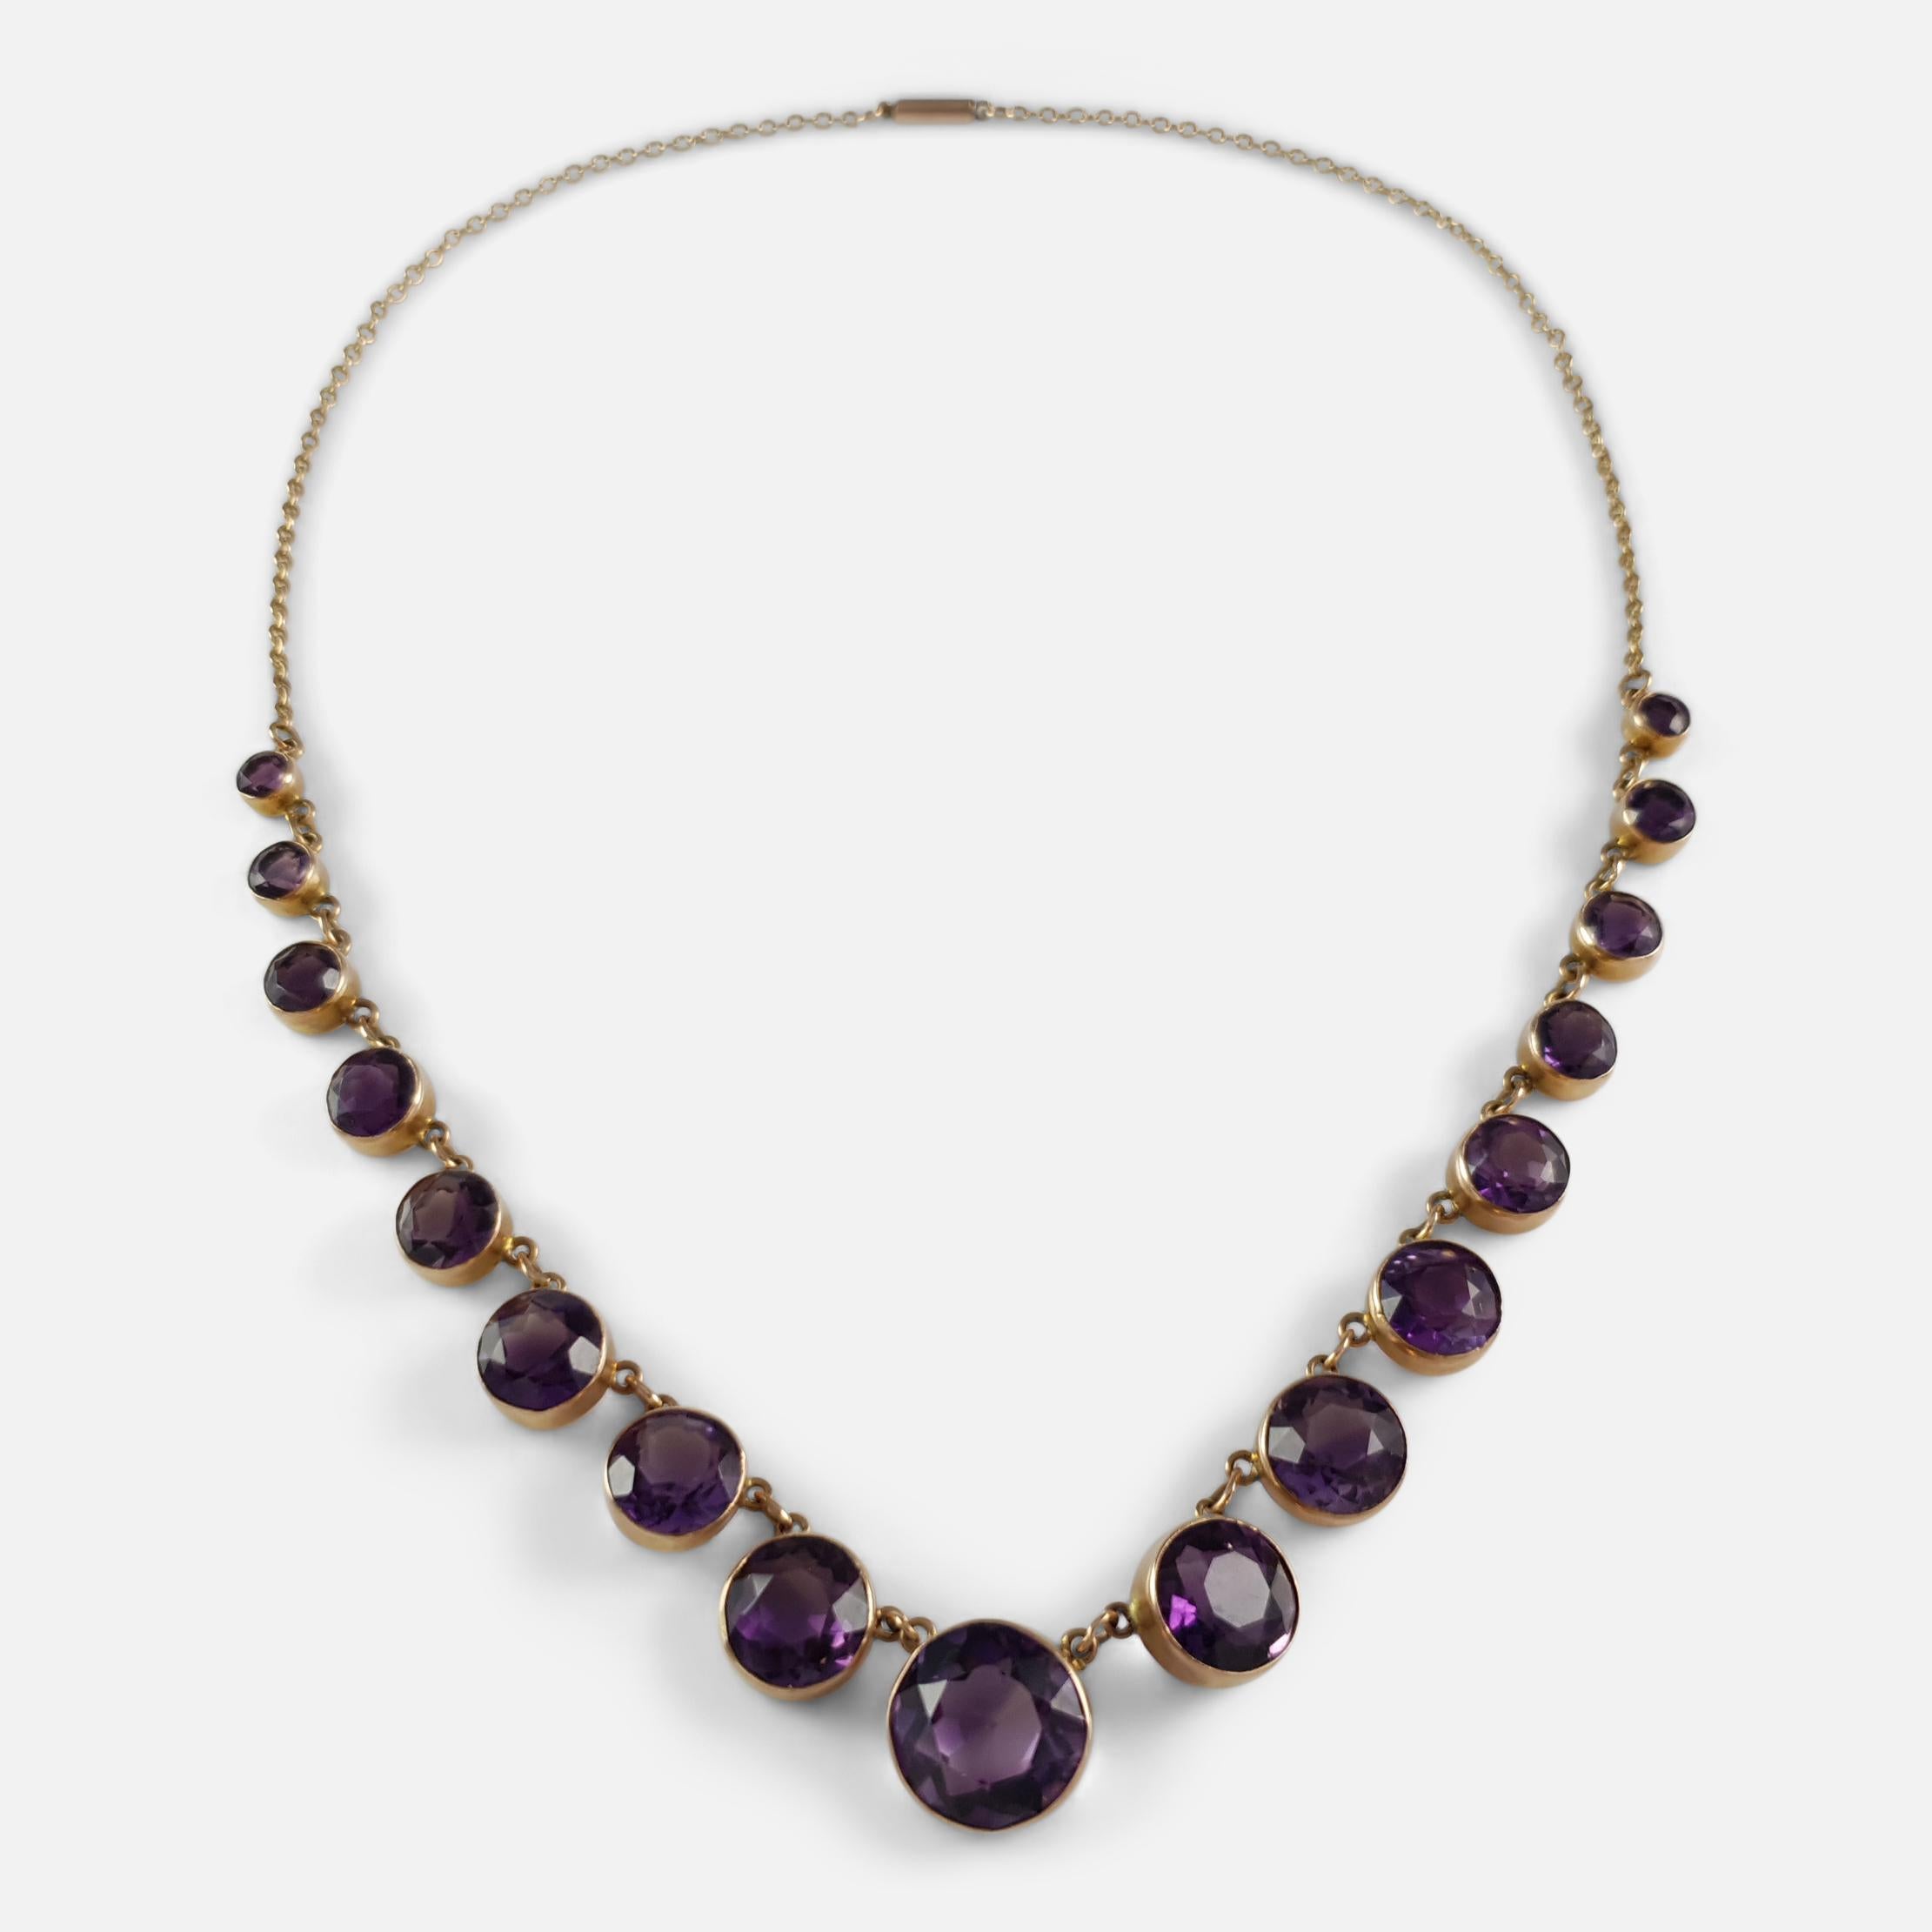 Description: - This is a stunning antique Victorian 9 karat yellow gold graduating amethyst Riviere necklace circa 1890. The amethyst necklace is collet-set to the front with a graduated line of circular-cut amethysts totalling approximately